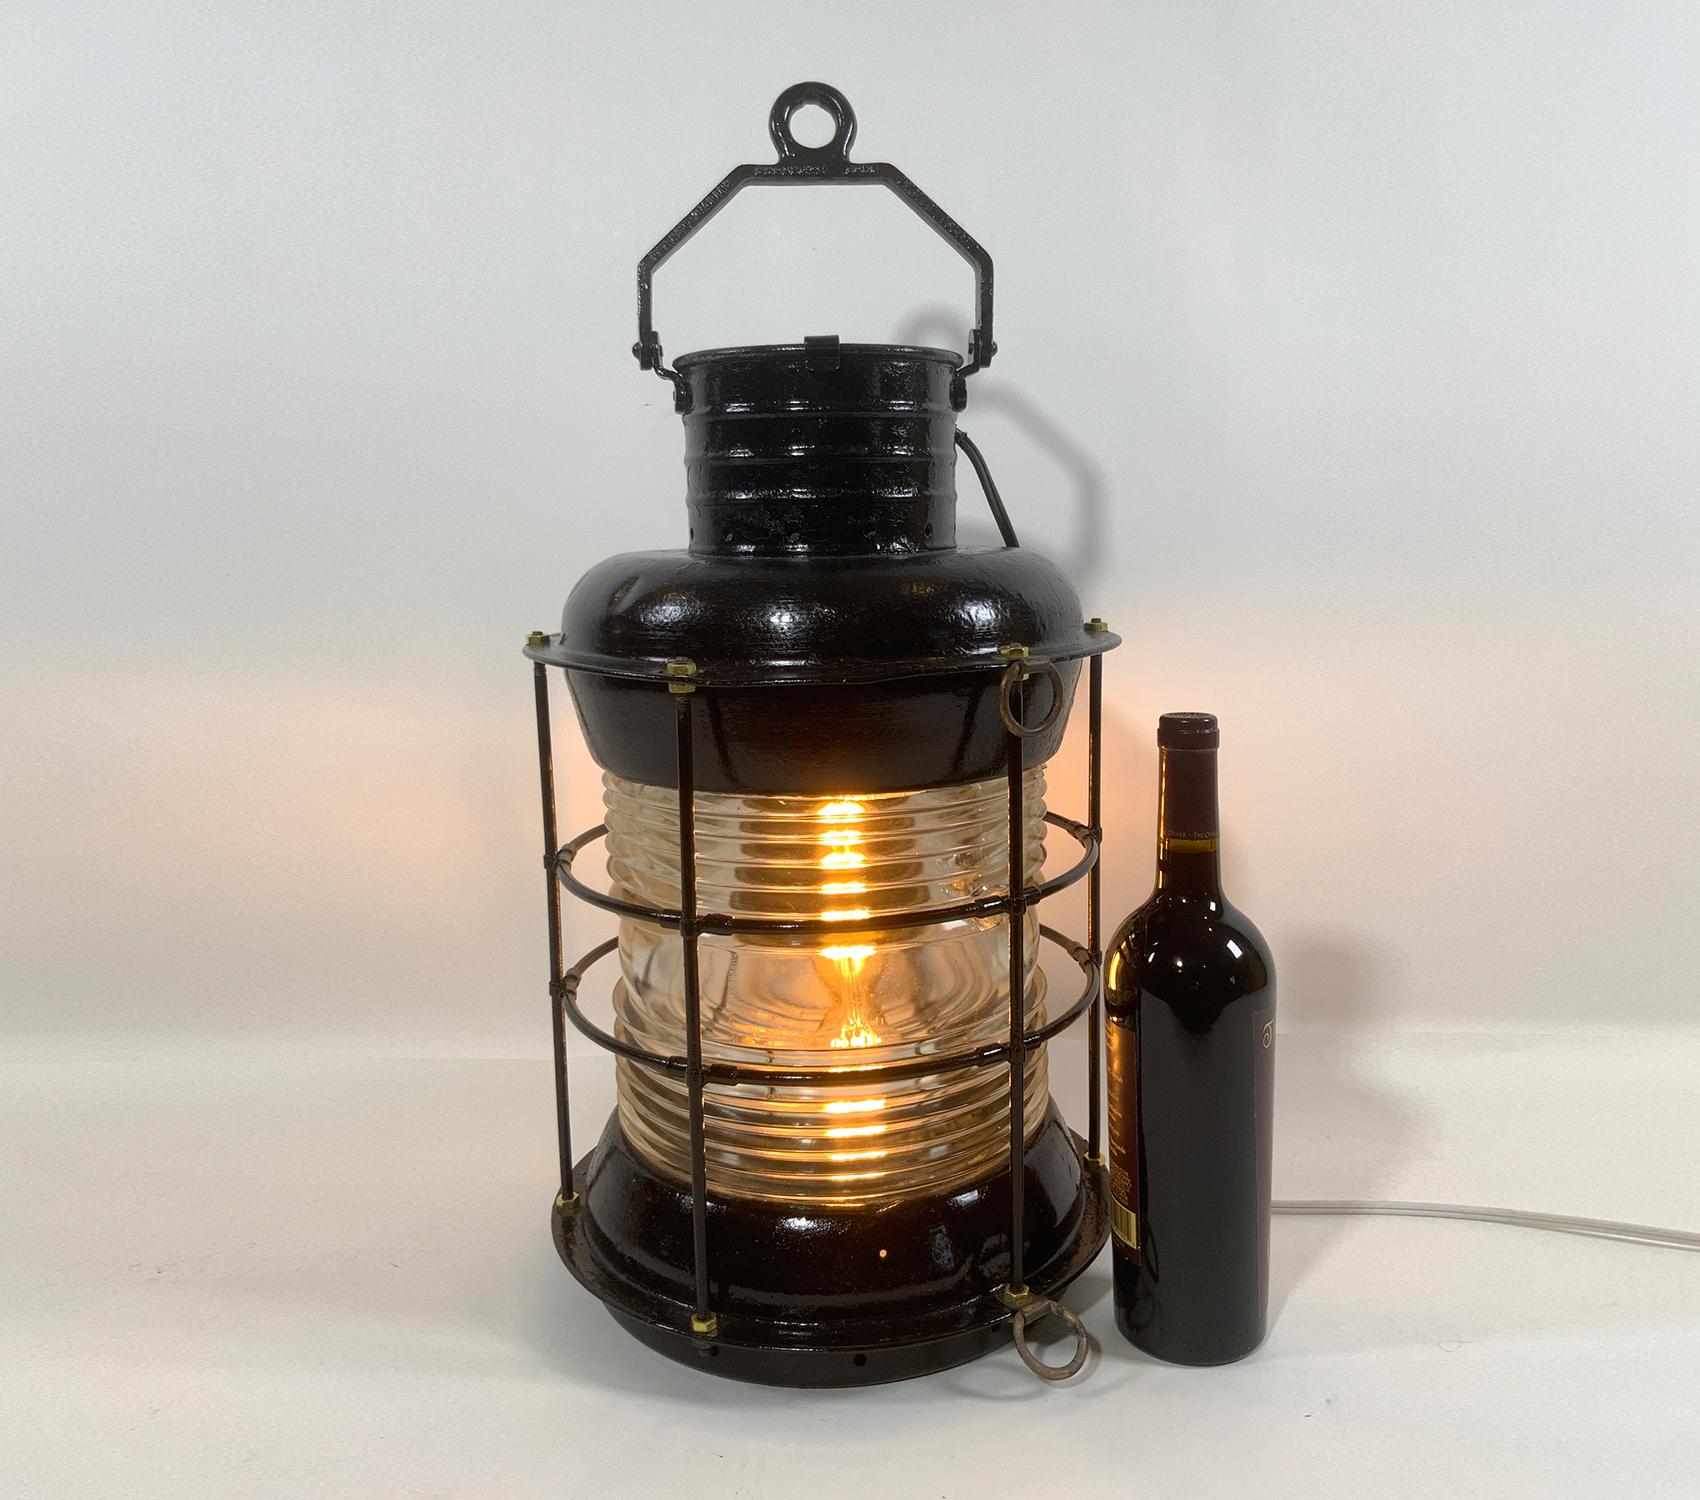 Very large ships lantern with Fresnel glass lens with outside cage. Some chips to lens from years of use. Wired with a socket.

Weight: 7 lbs.
Overall Dimensions: 20